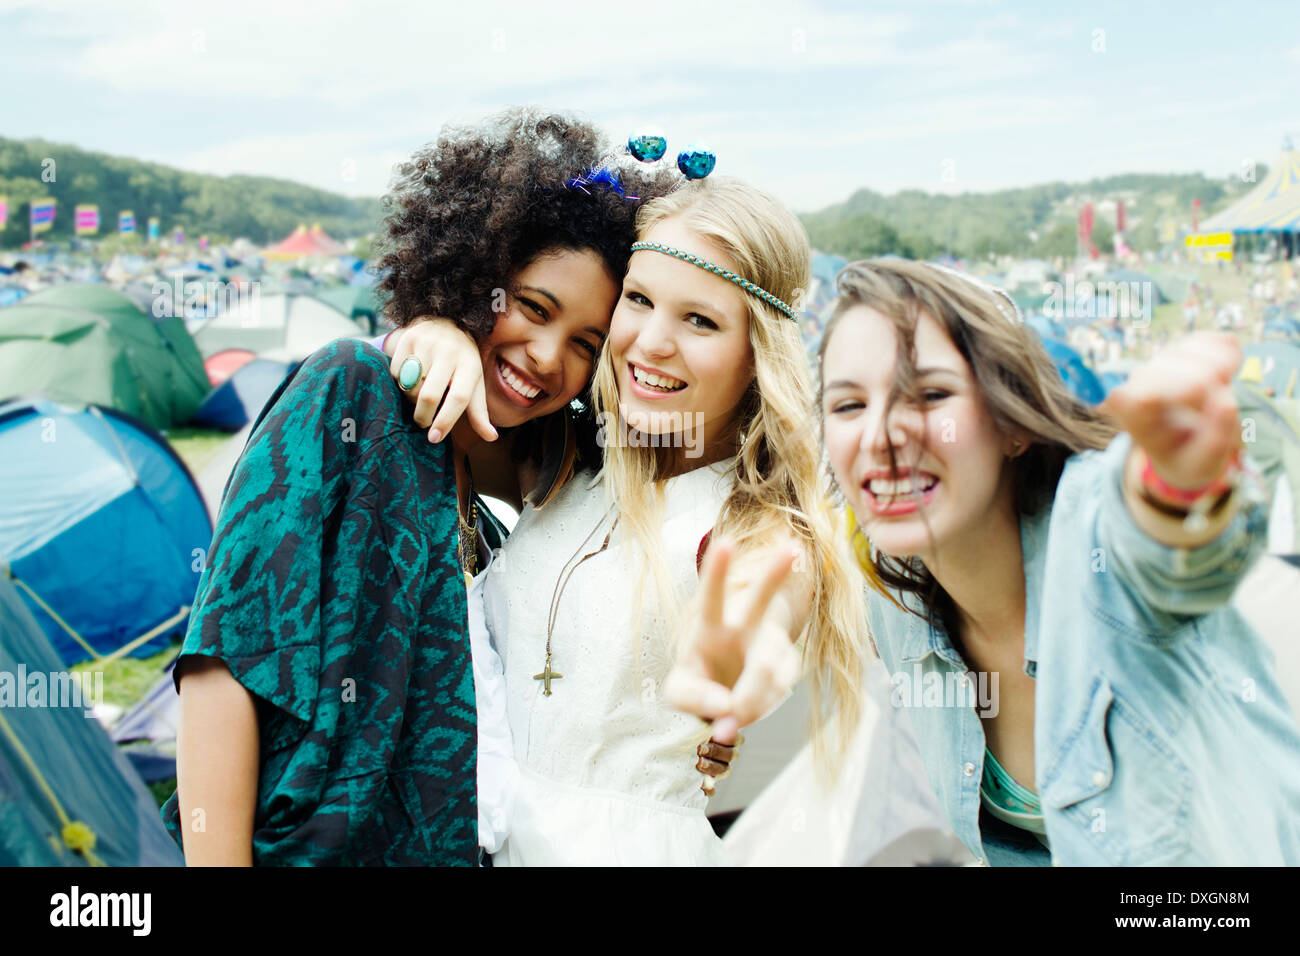 Friends hugging outside tents at music festival Stock Photo